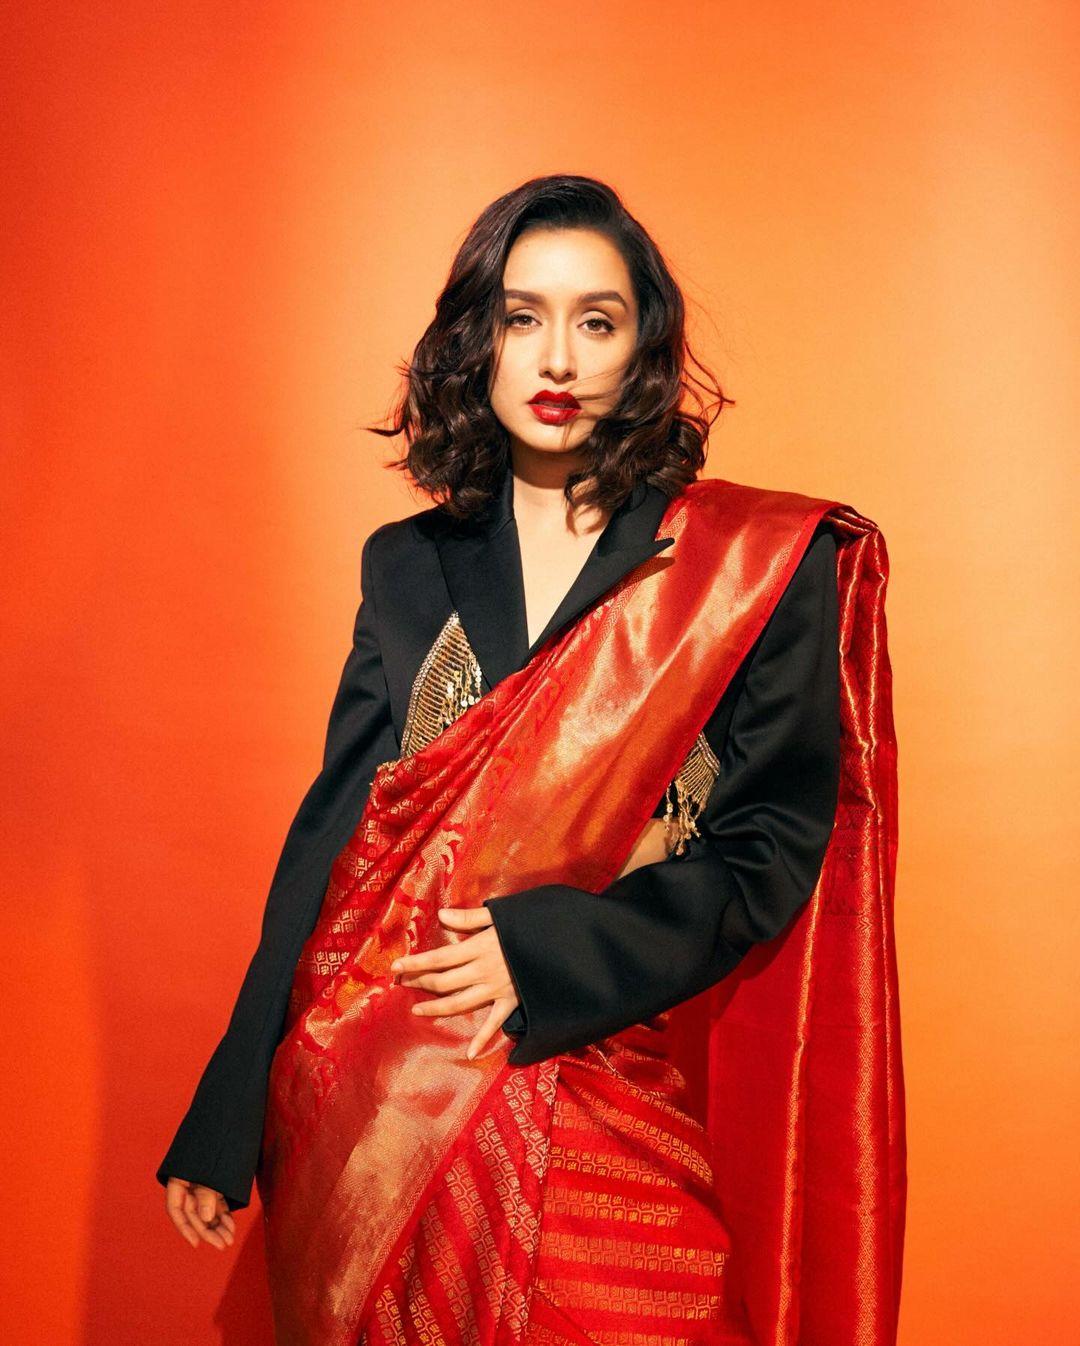 She wore a classic red silk saree, a symbol of timeless elegance. What made the outfit stand out was the unconventional addition of a cropped black blazer adorned with gold accents